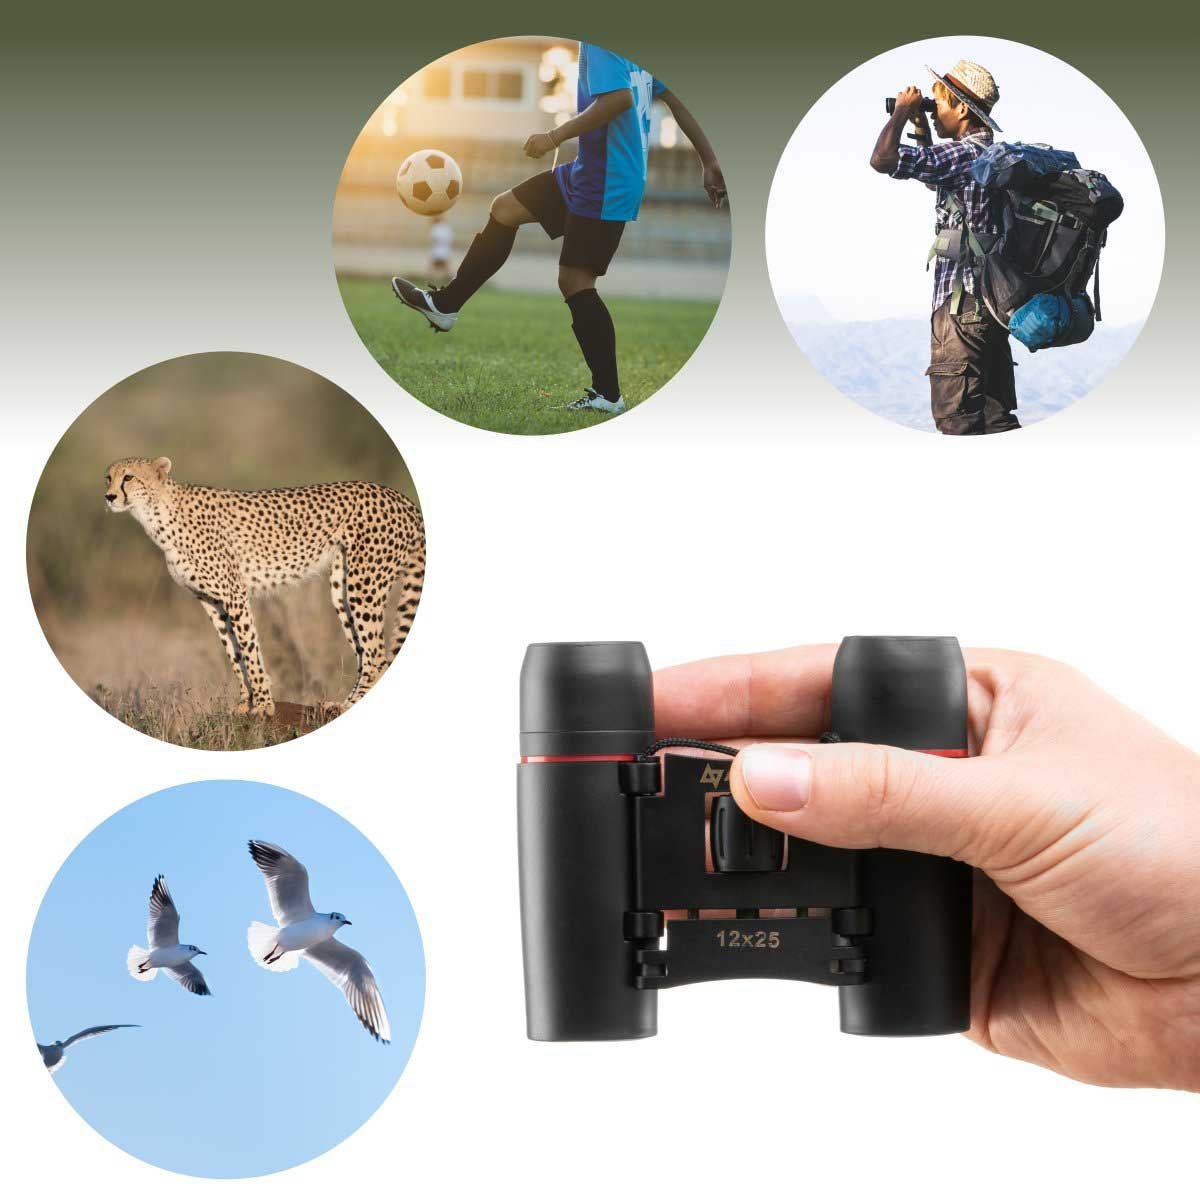 12x25 Camping Binocular for Fishing and Outdoor could be used to explore the distant world around you